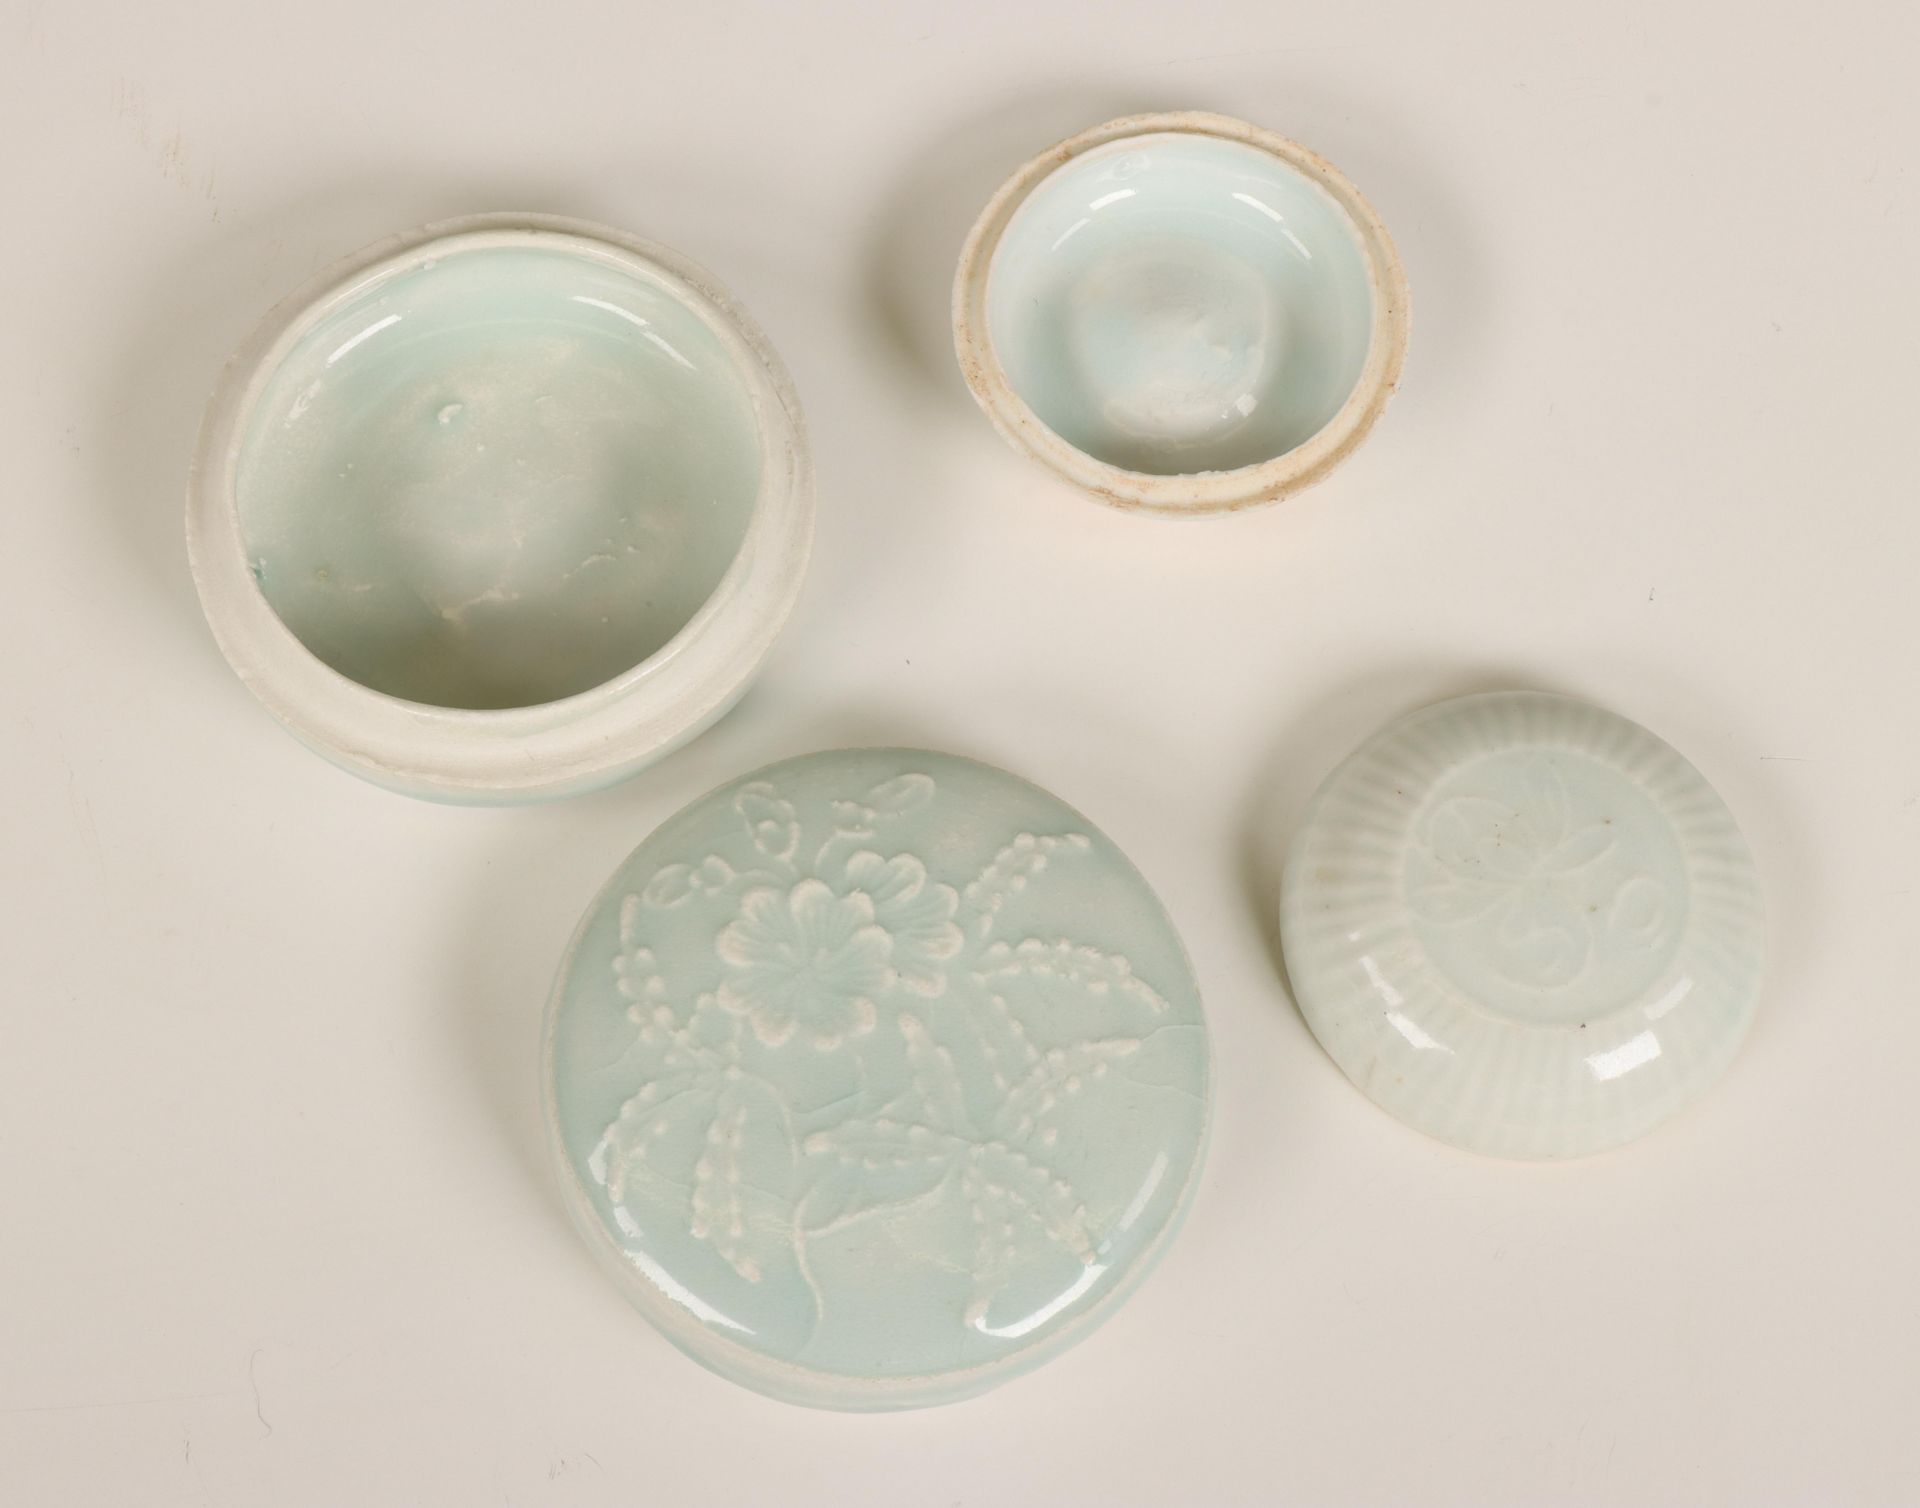 China, two Qingbai porcelain cosmetics boxes, Song dynasty (960-1279), - Image 3 of 3